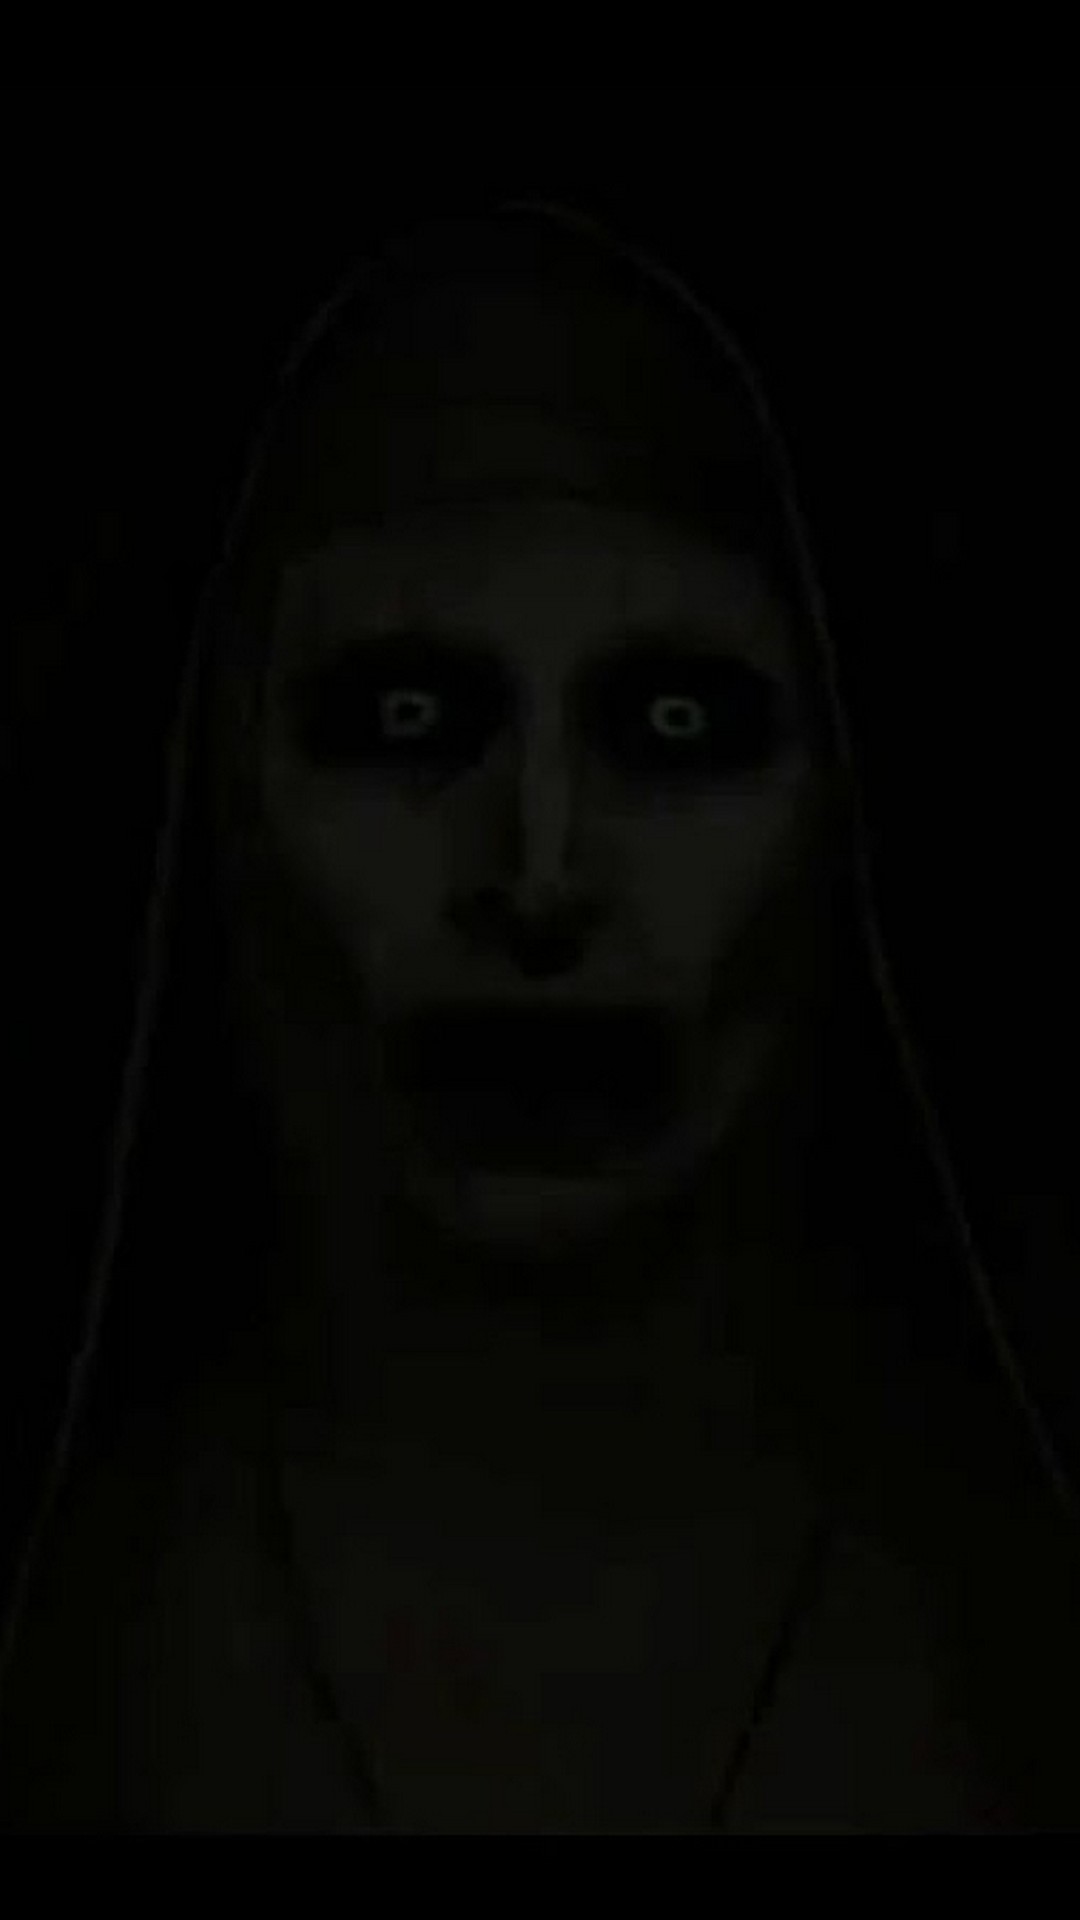 The Nun Valak iPhone Wallpaper with image resolution 1080x1920 pixel. You can make this wallpaper for your iPhone 5, 6, 7, 8, X backgrounds, Mobile Screensaver, or iPad Lock Screen